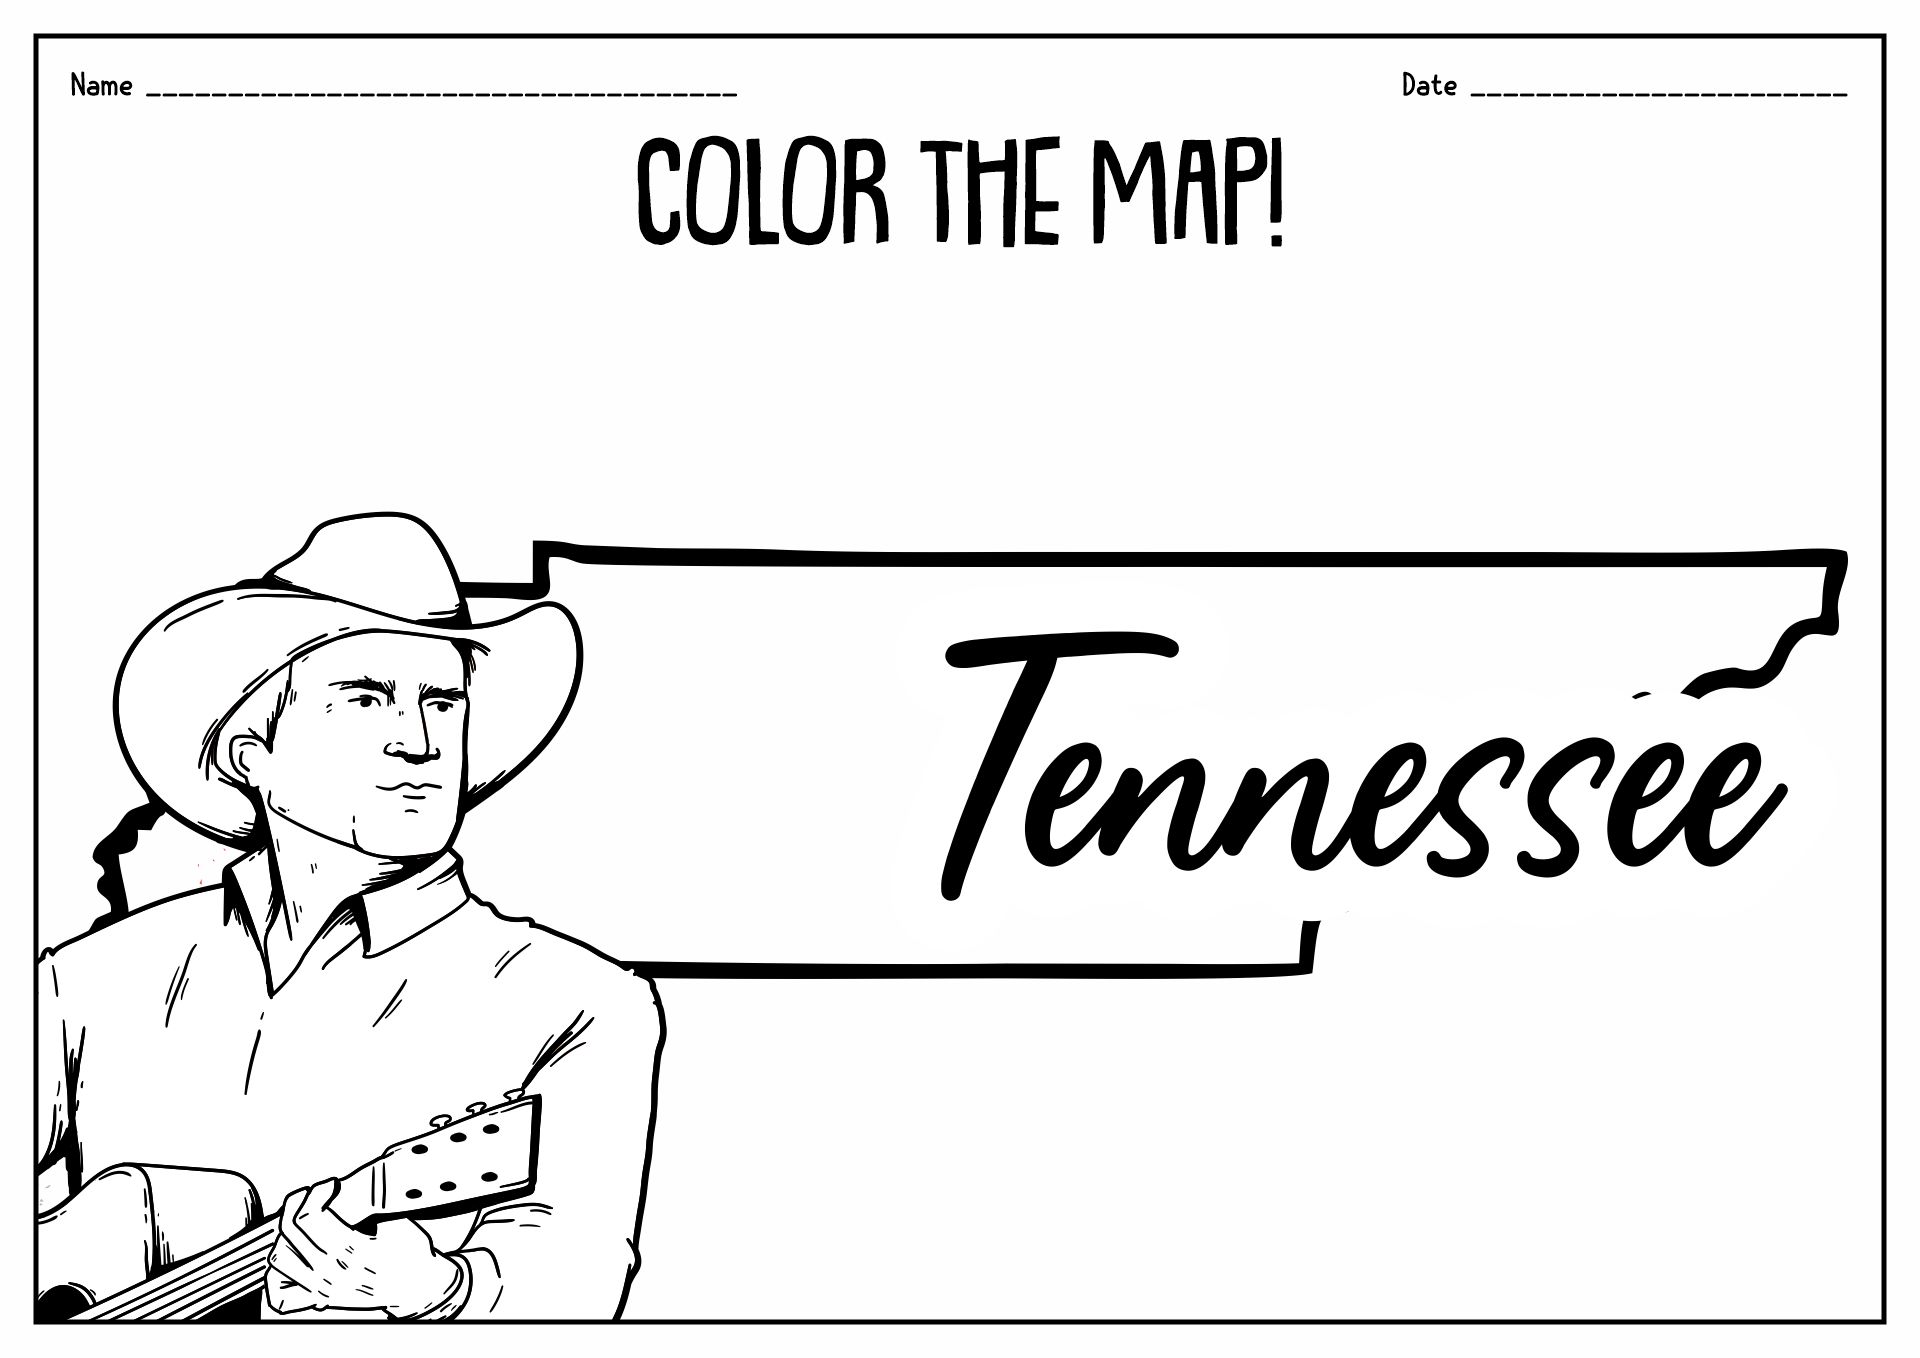 Tennessee State Map Coloring Page Image